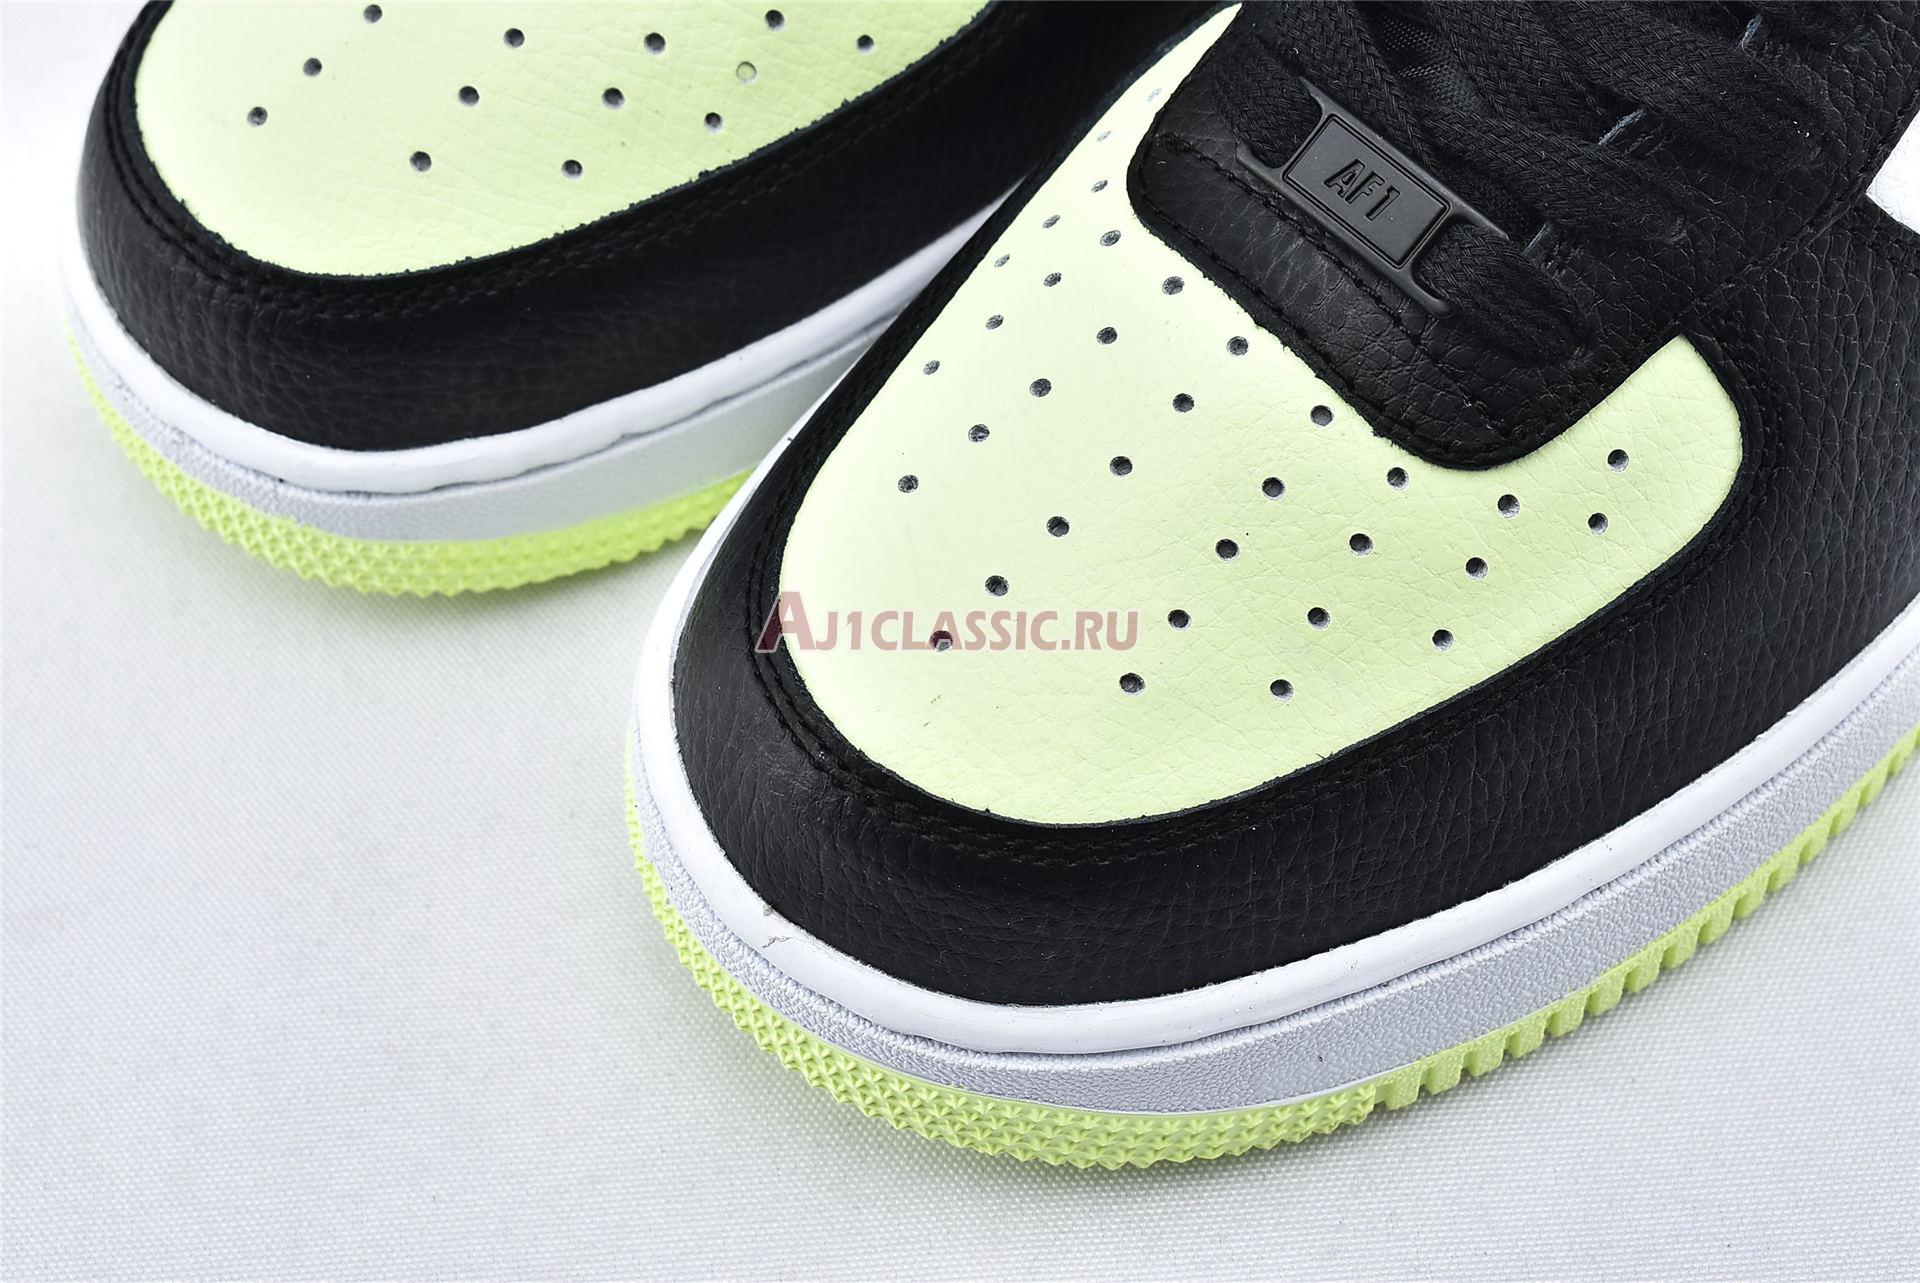 Nike Air Force 1 Low "Barely Volt" CW2361-700